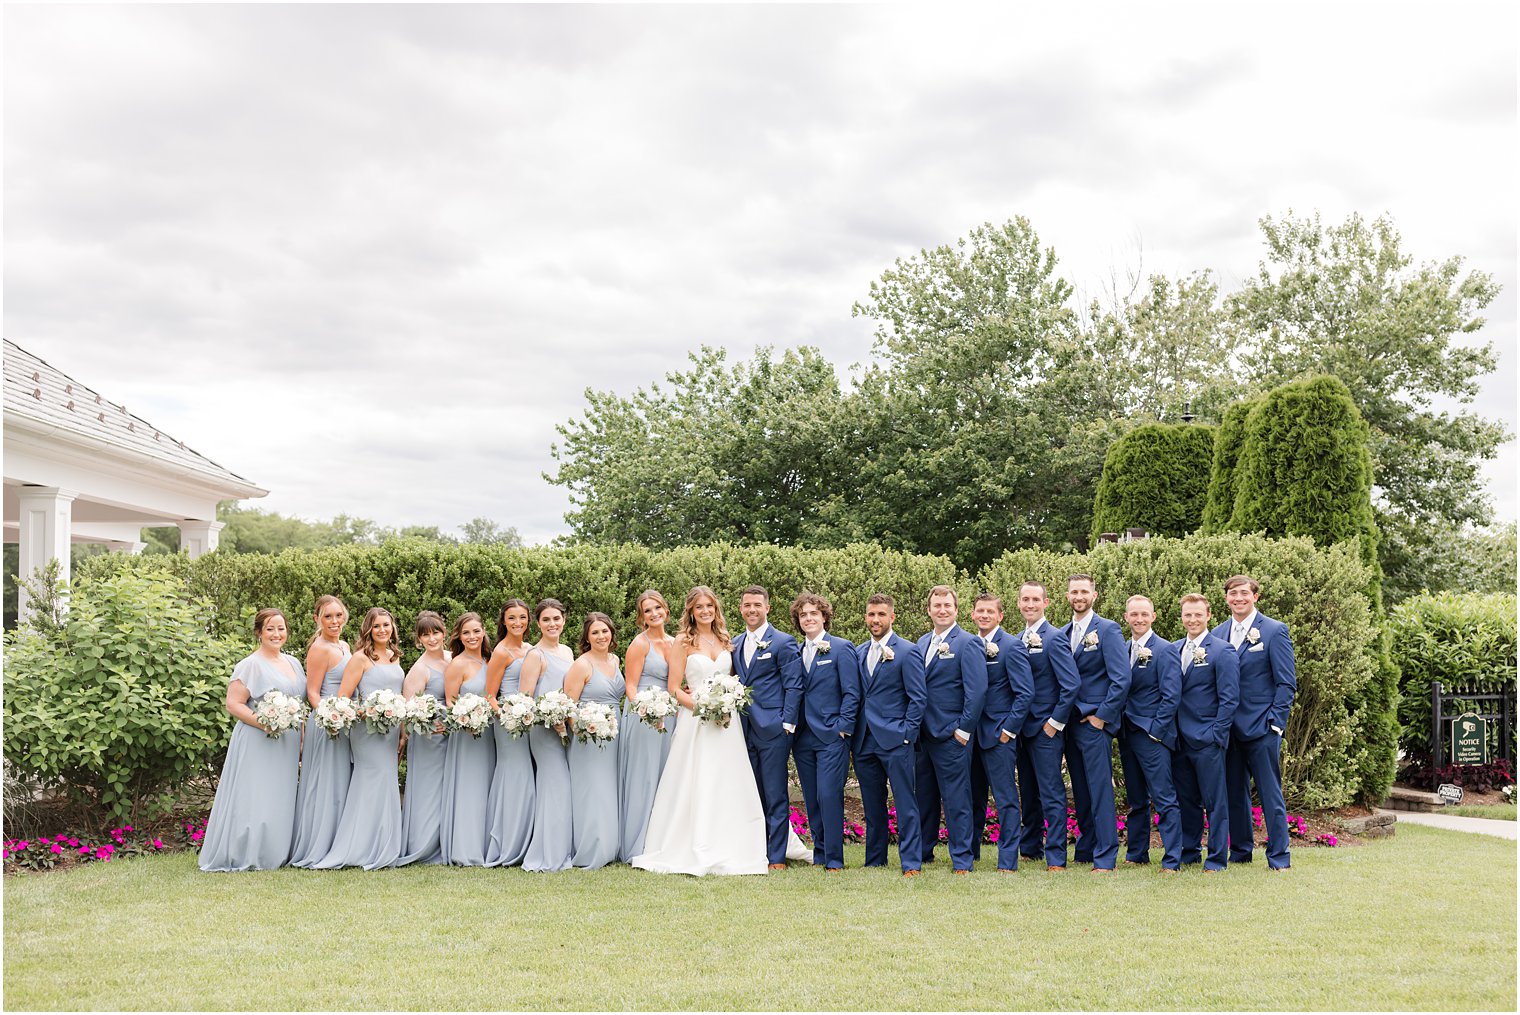 newlyweds stand with wedding party in light blue dresses and navy suits